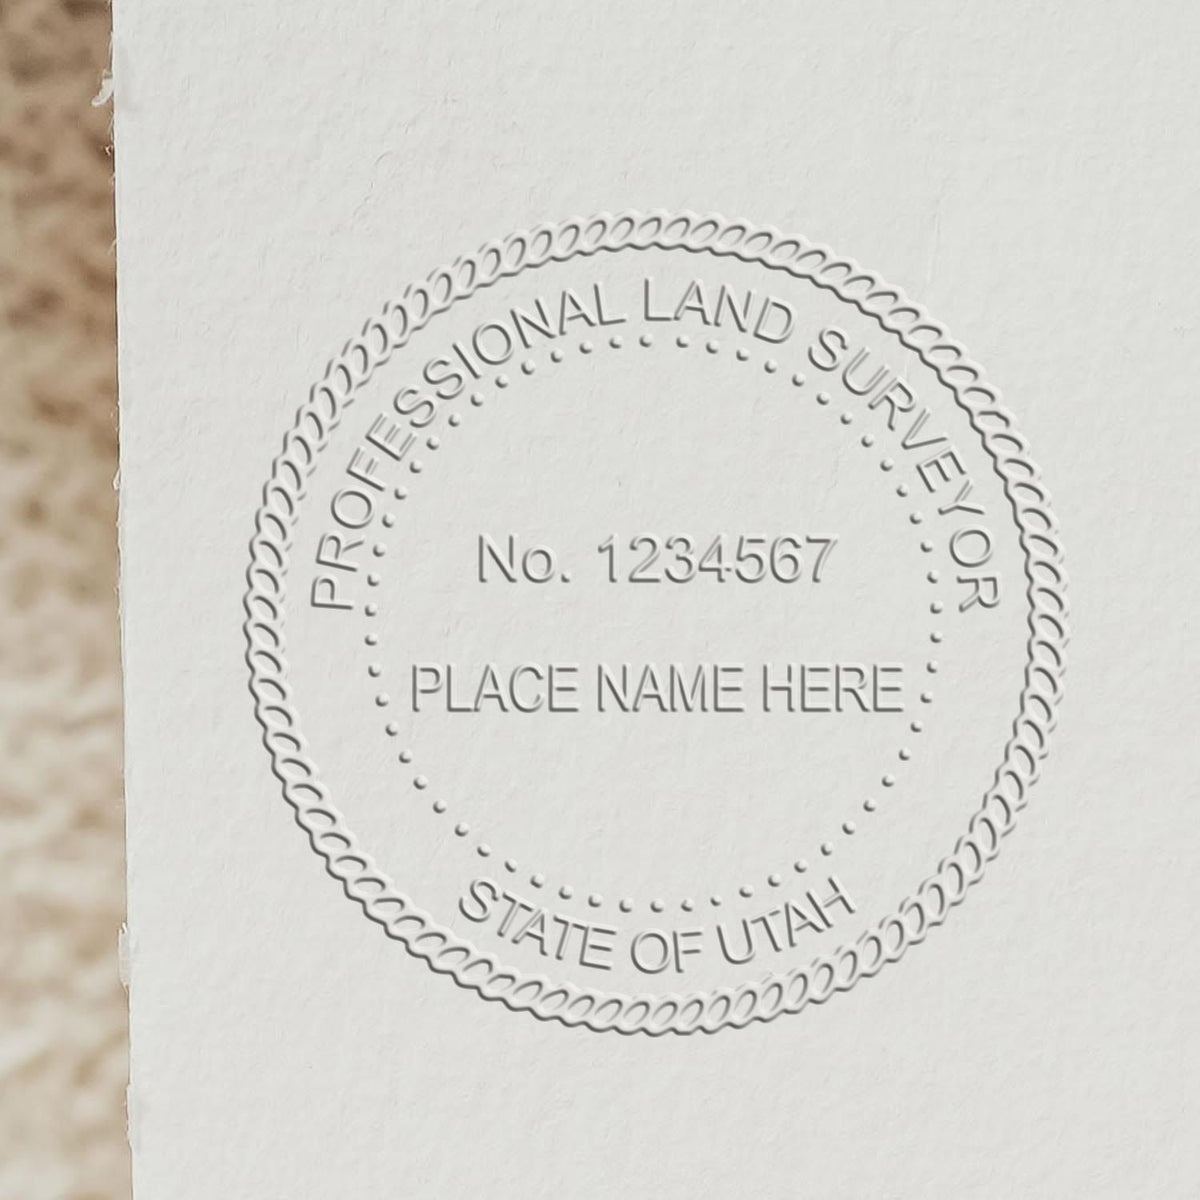 A lifestyle photo showing a stamped image of the State of Utah Soft Land Surveyor Embossing Seal on a piece of paper